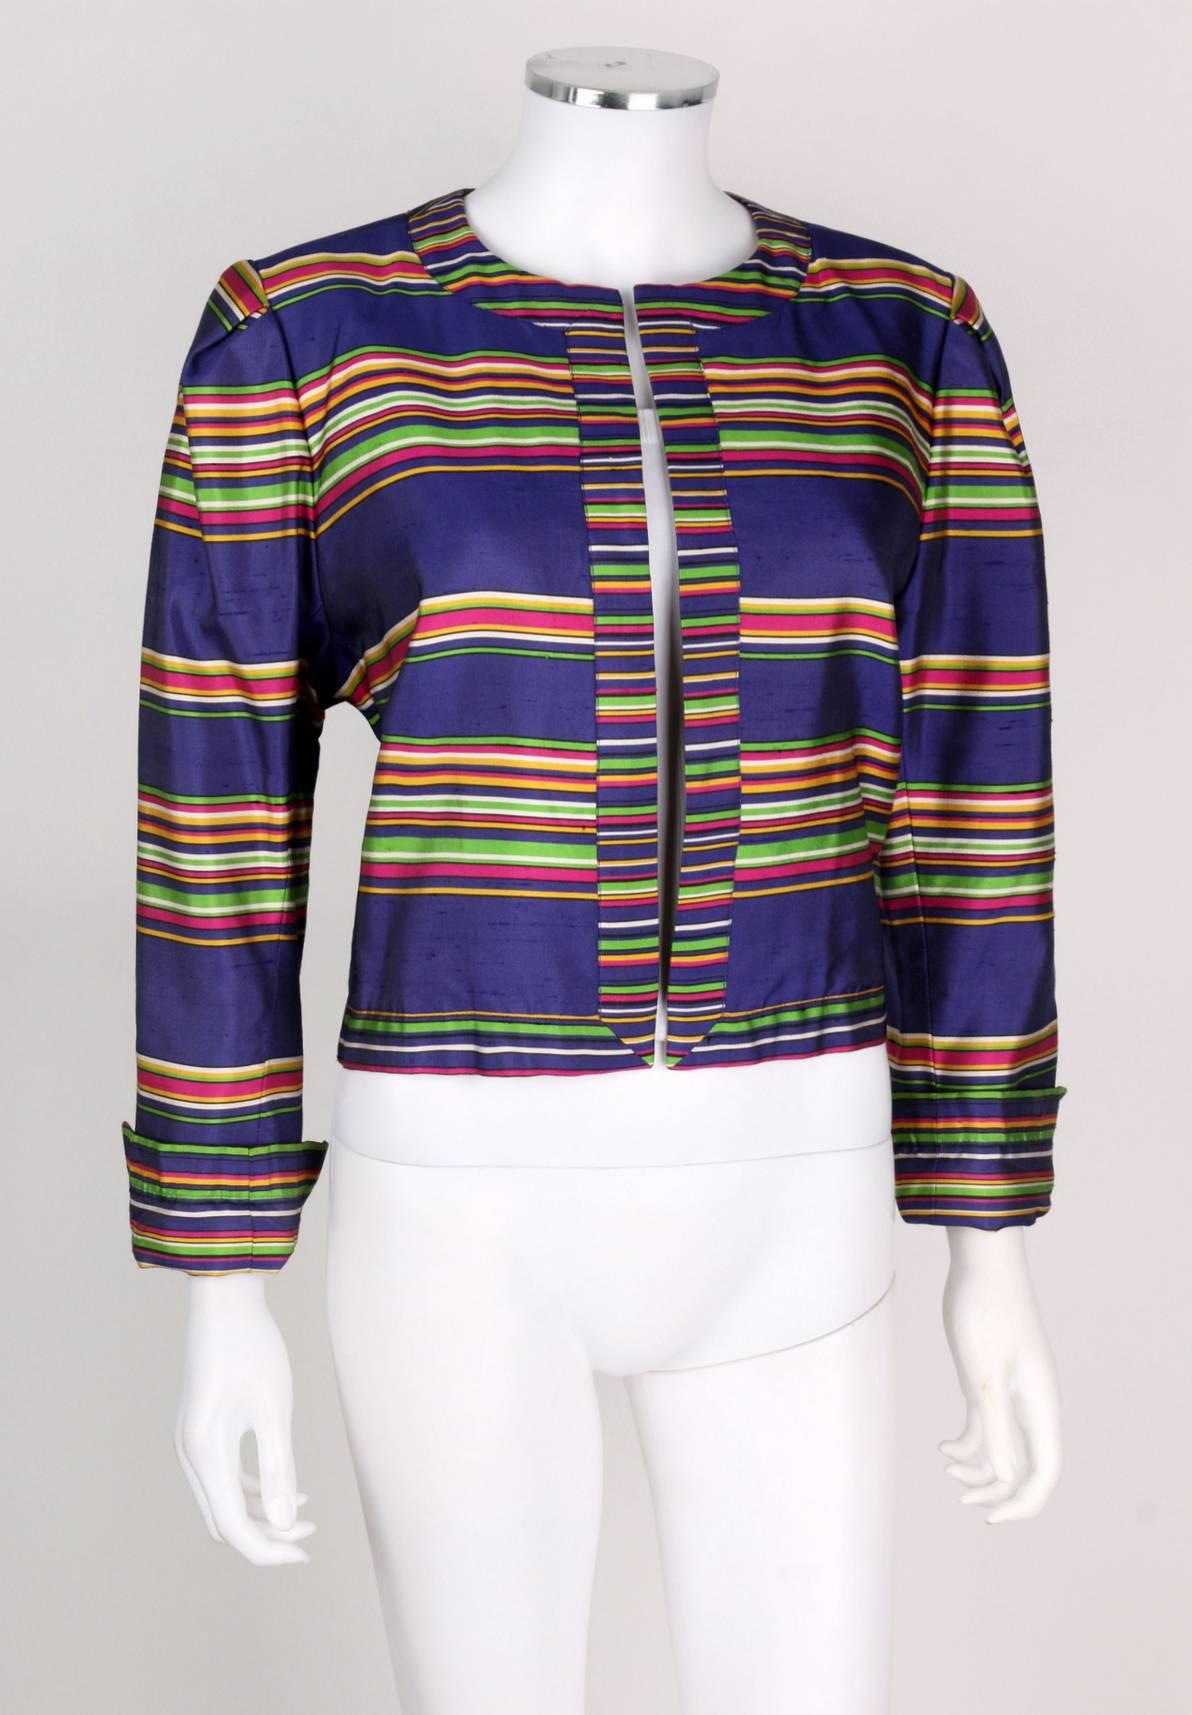 Yves Saint Laurent Cruise 1991 multicolor striped jacket. Horizontal striped pattern in shades of magenta, golden yellow, green, purple, and white. Open front style. Scoop neckline. Long sleeves with slit at cuff. Matching striped trim around